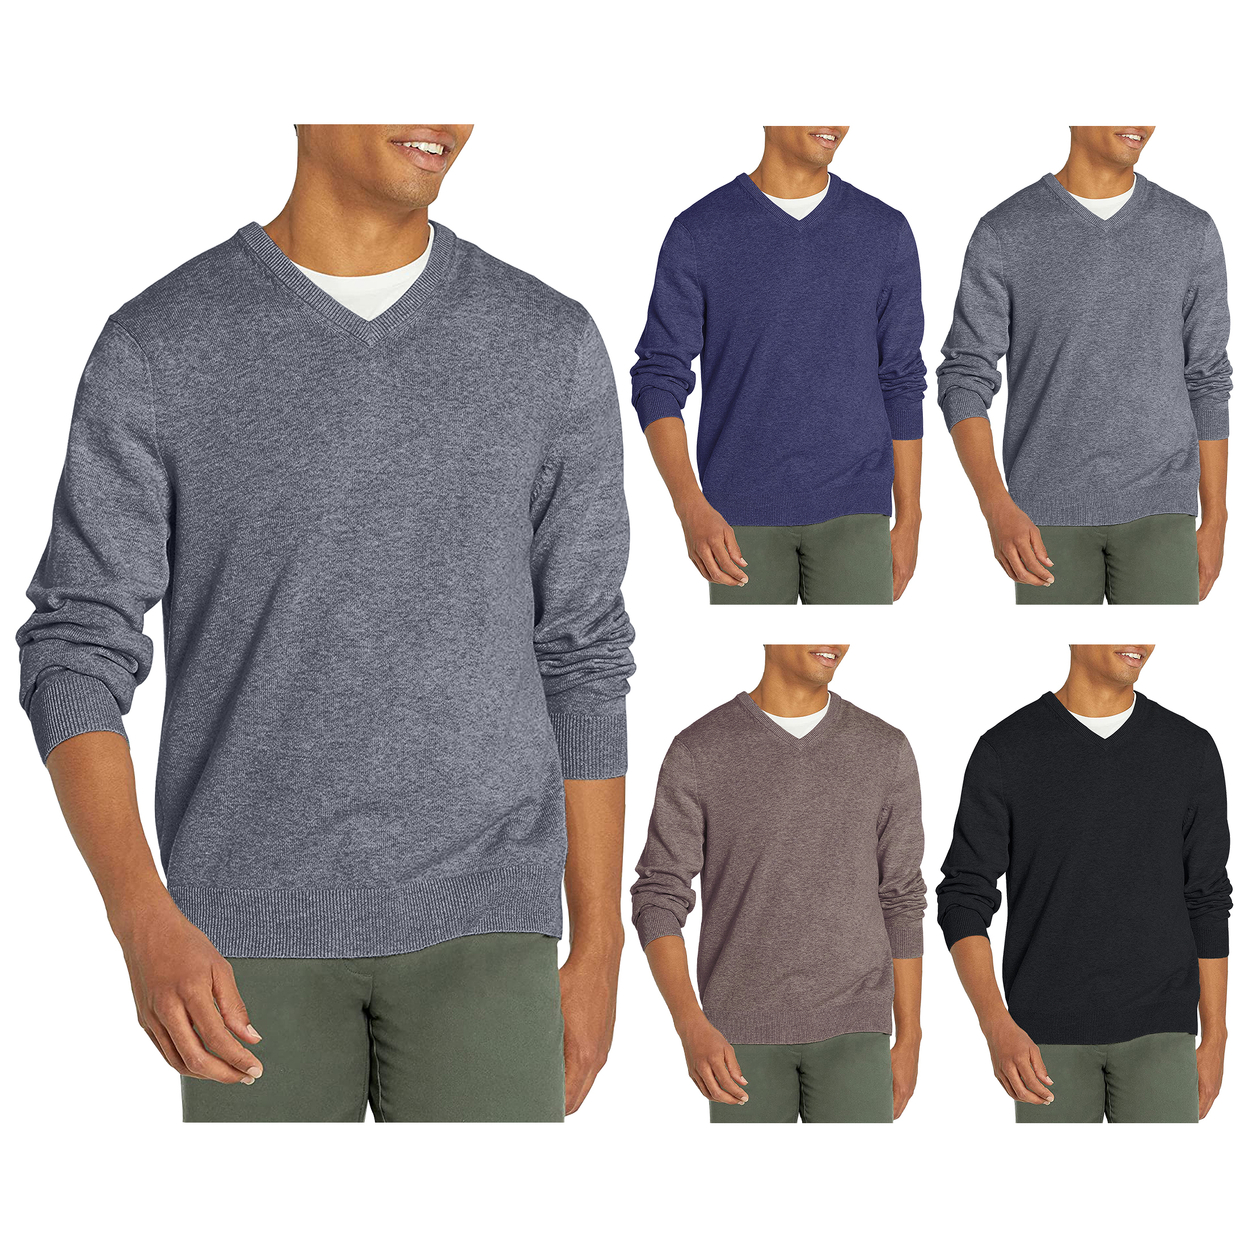 Men's Casual Ultra-Soft Slim Fit Warm Knit V-Neck Sweater - Grey, Xx-large